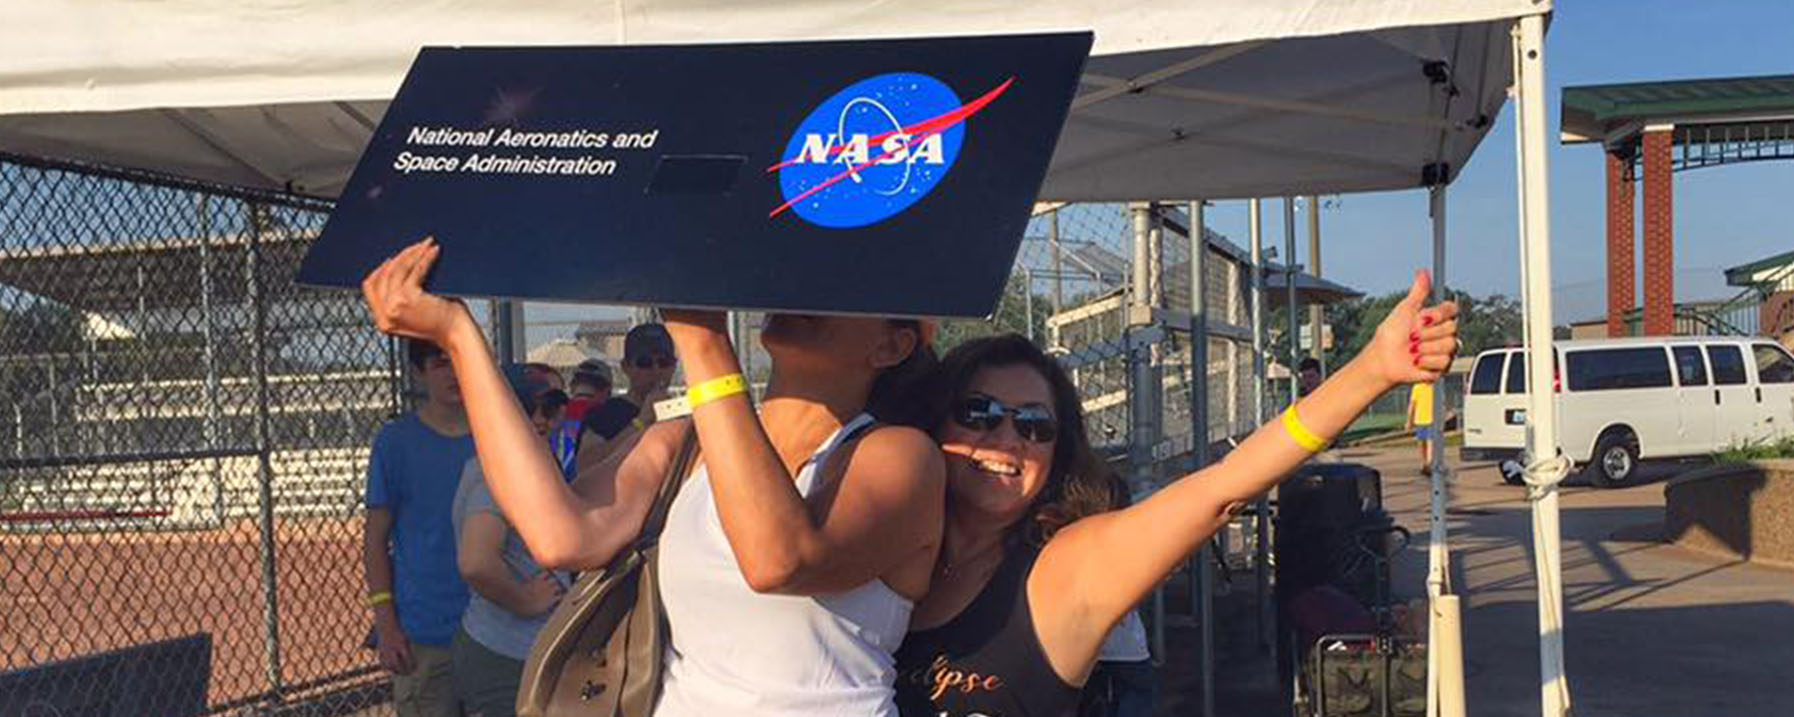 Two Young Ladies Enjoy NASA's Booth for the 2017 Solar Eclipse